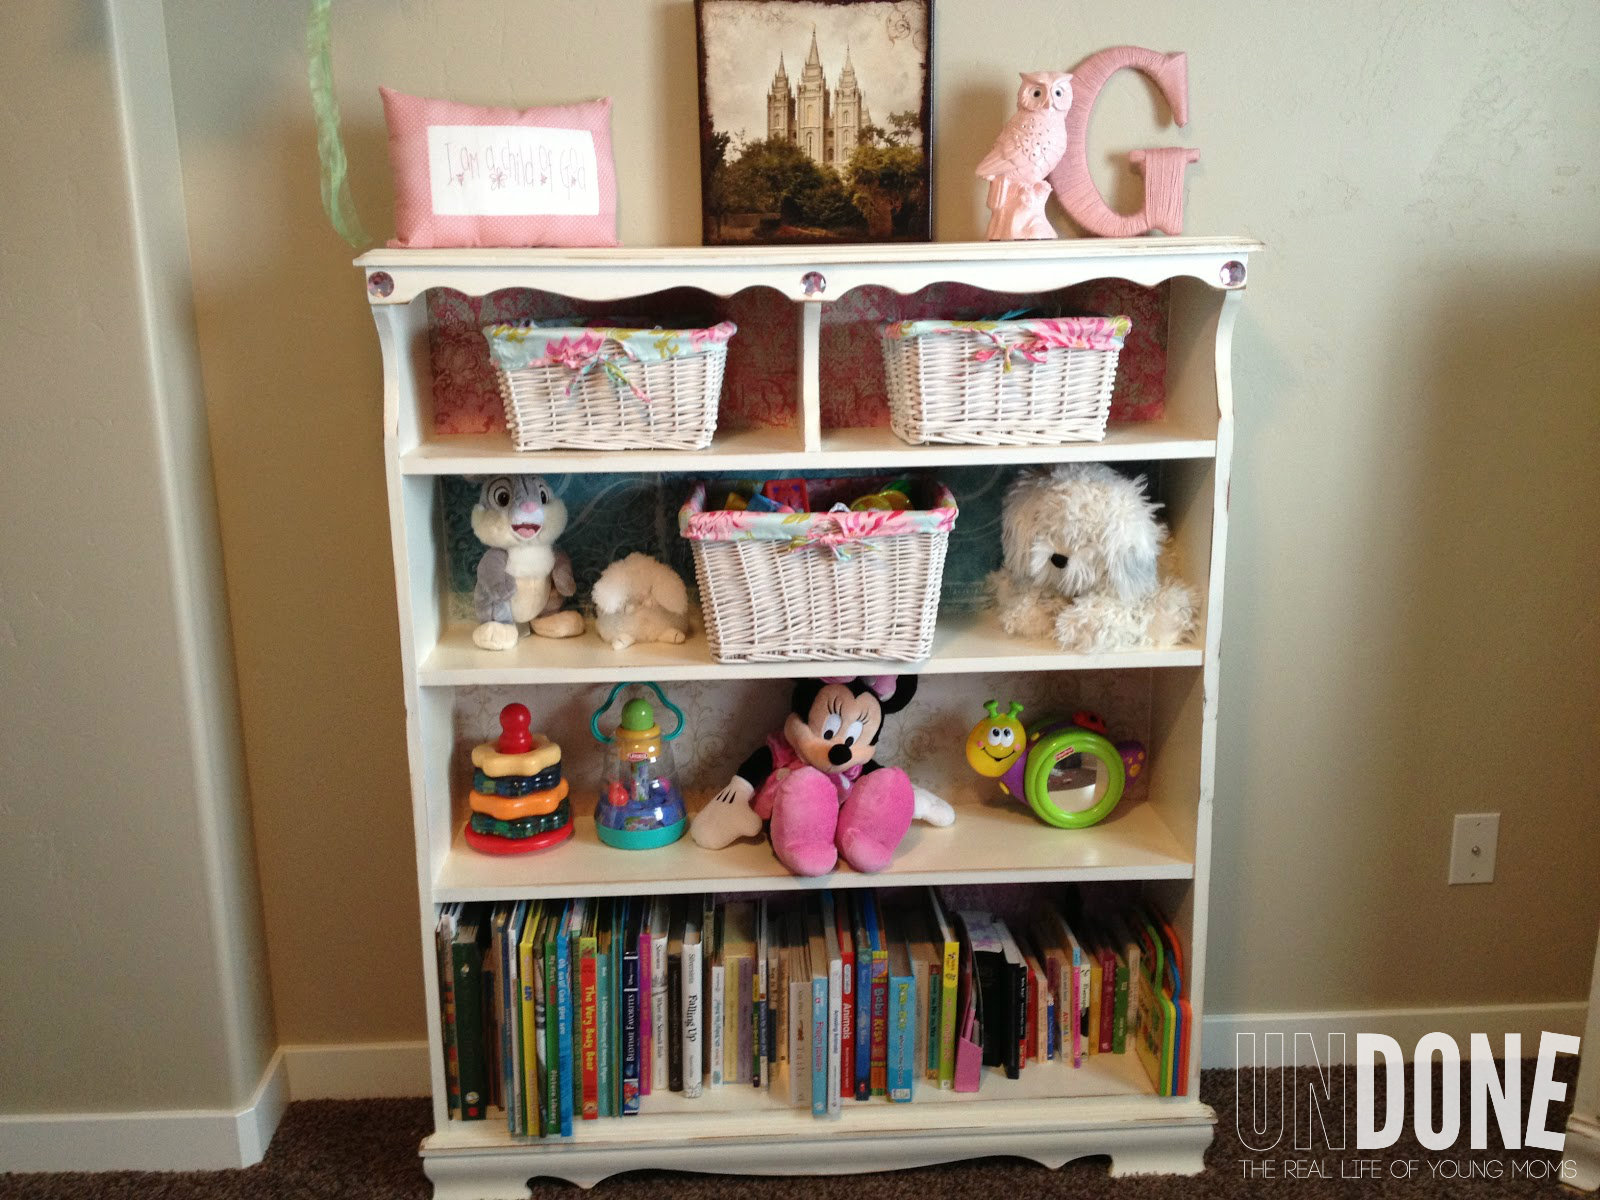  Chic bookcase revamp - make a second hand bookcase look awesome